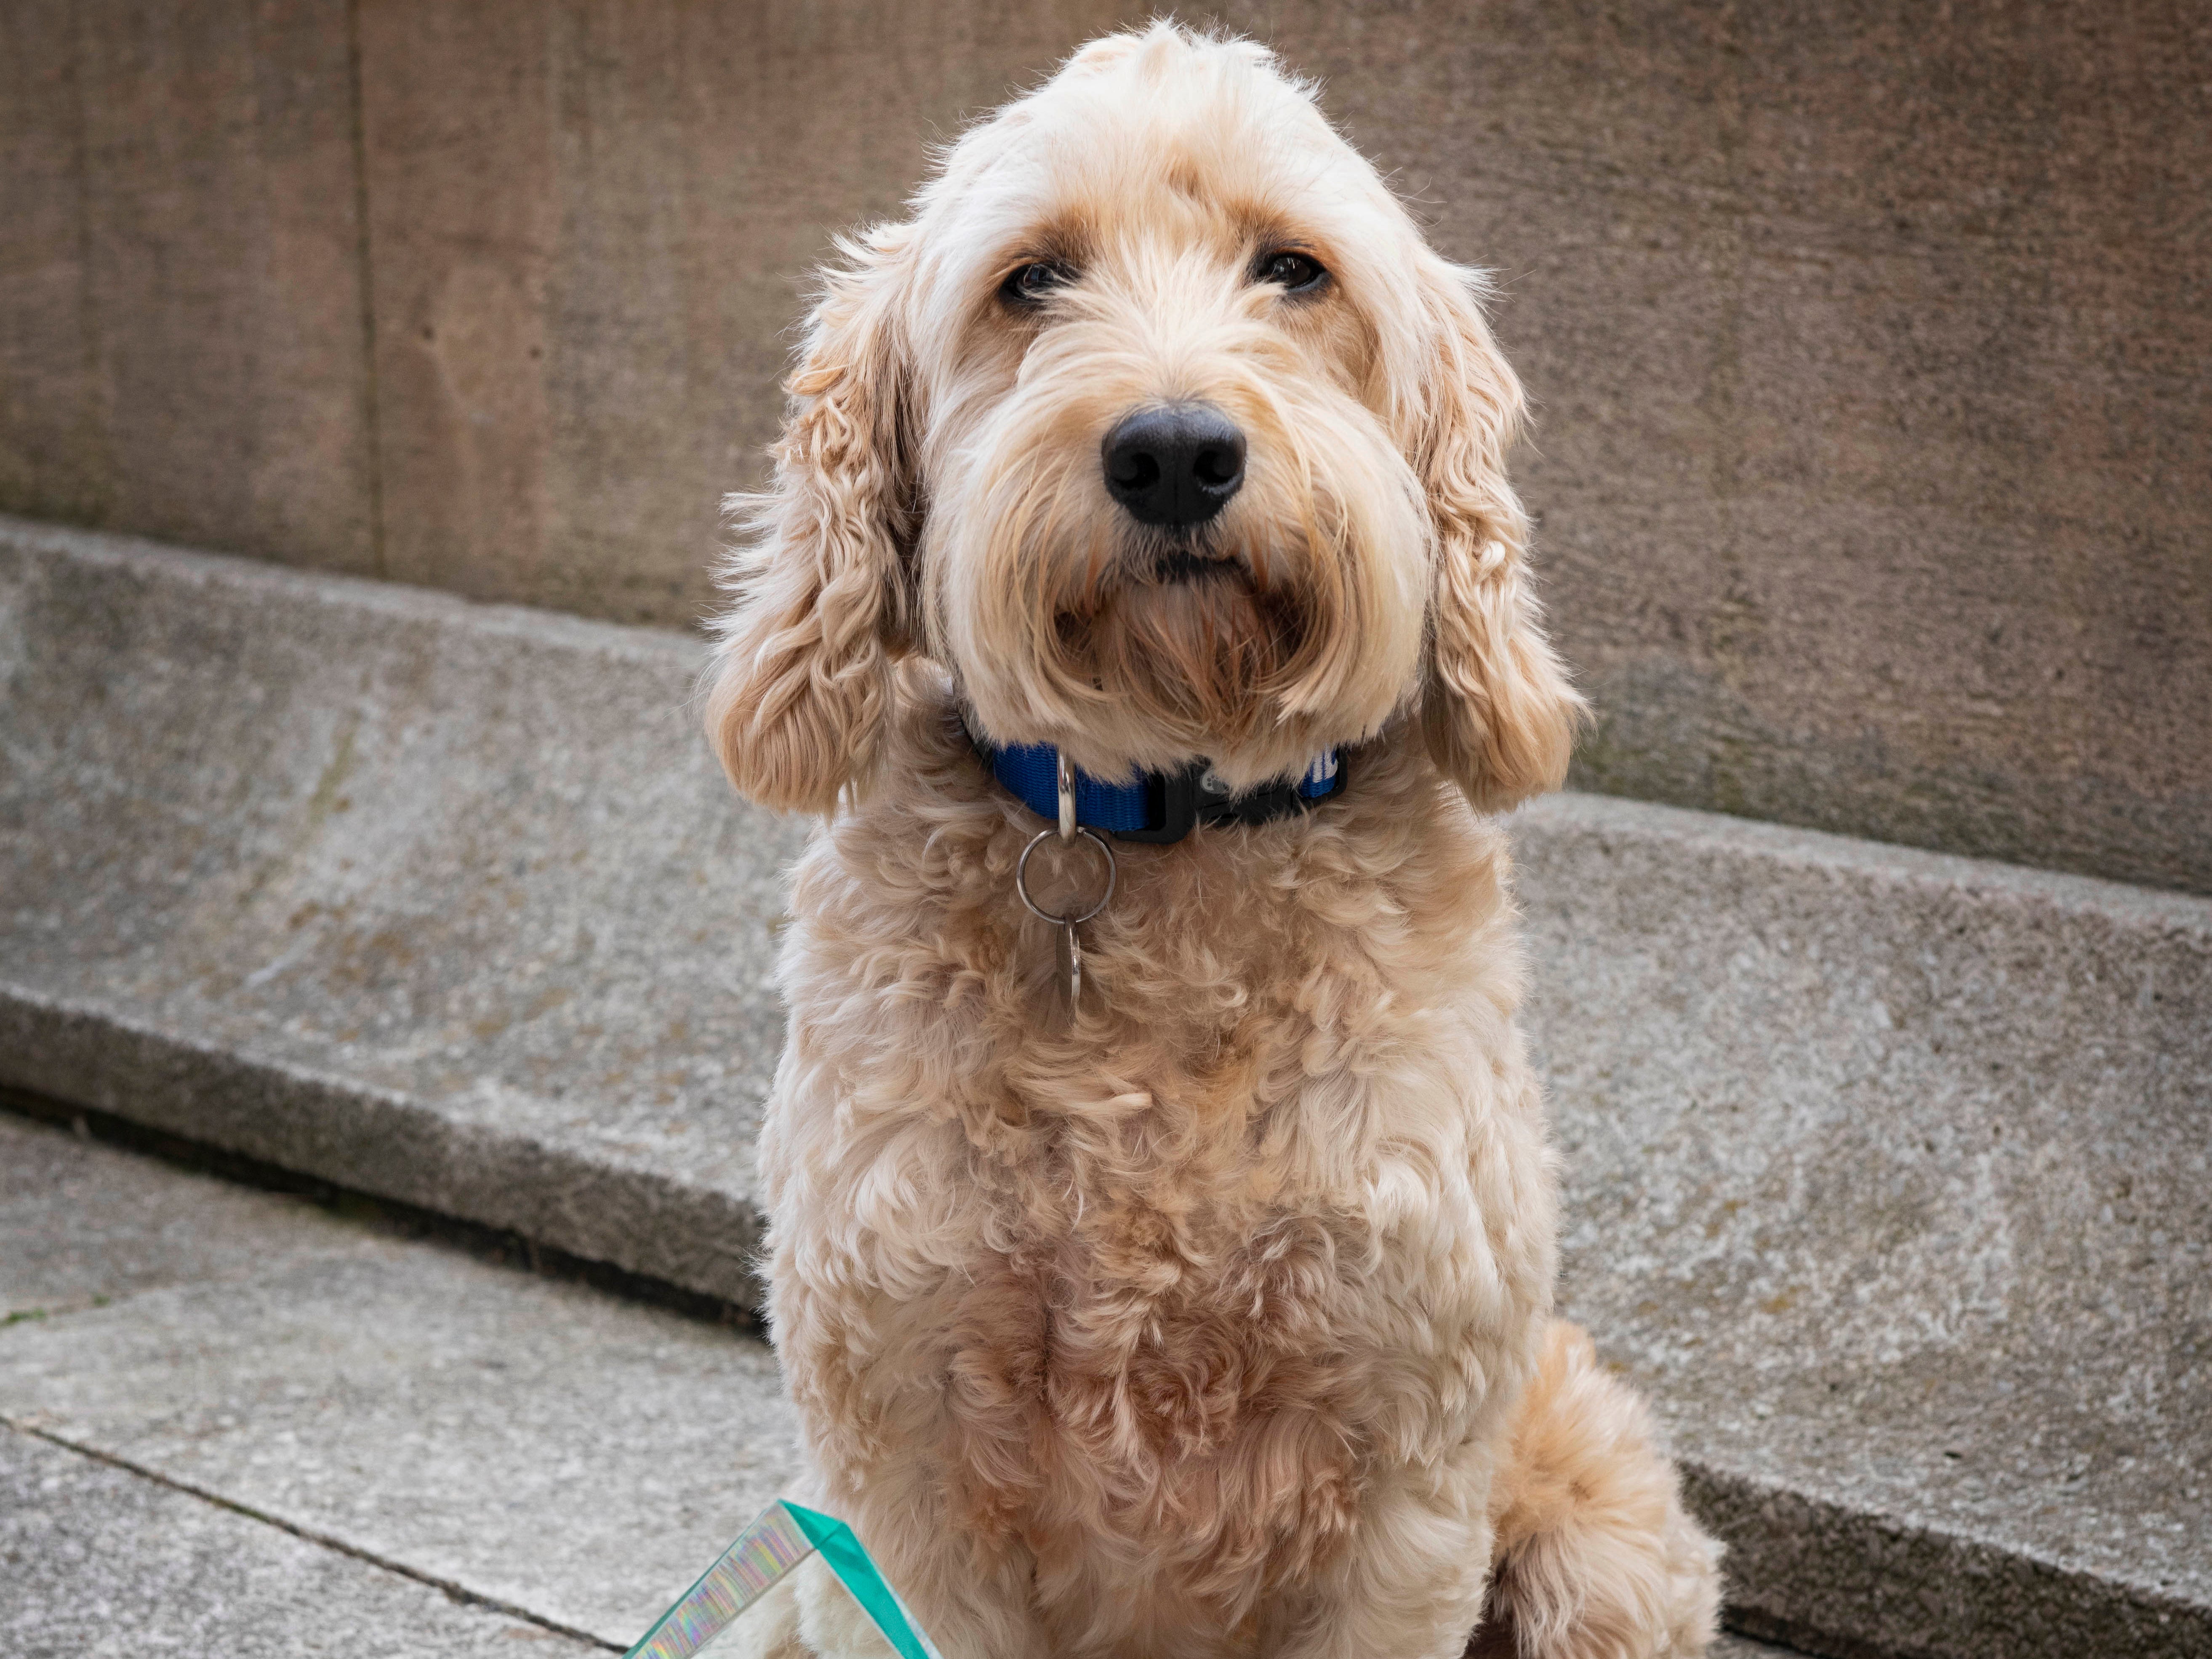 Jasper the cockapoo was awarded the title ‘Animal of the Year’ in 2021 by the International Fund for Animal Welfare